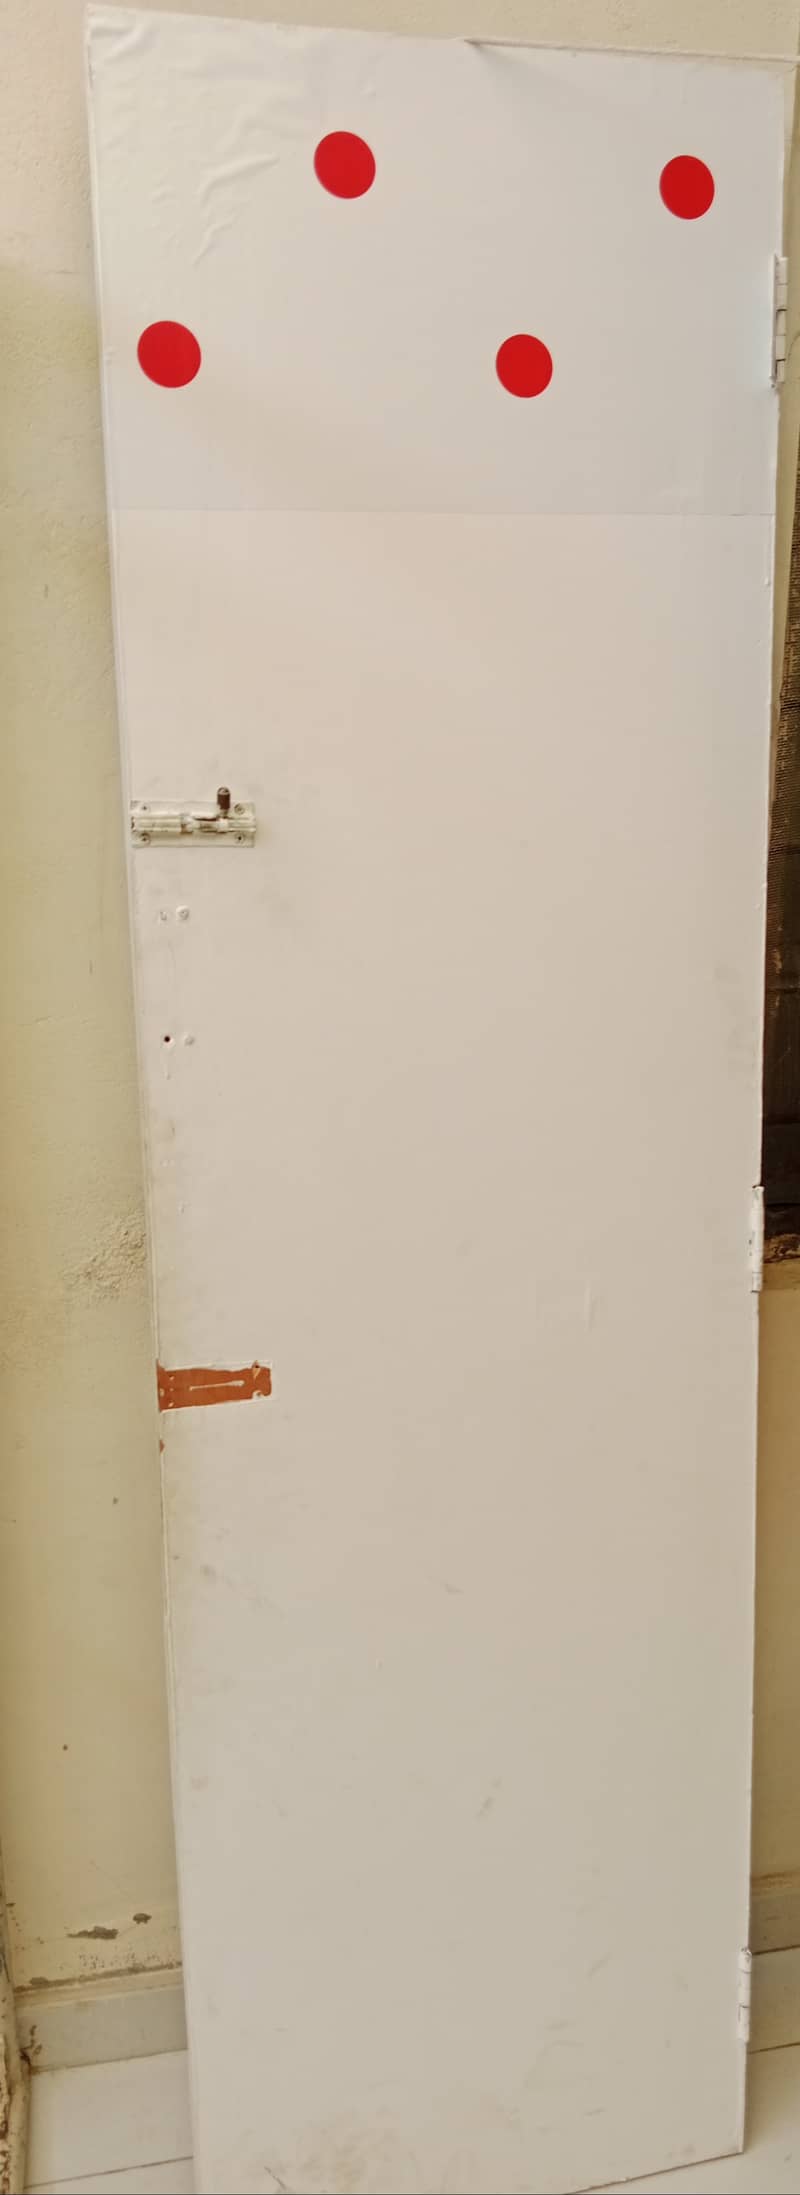 Door for sale neat and clean only WhatsUp 03060103003 9